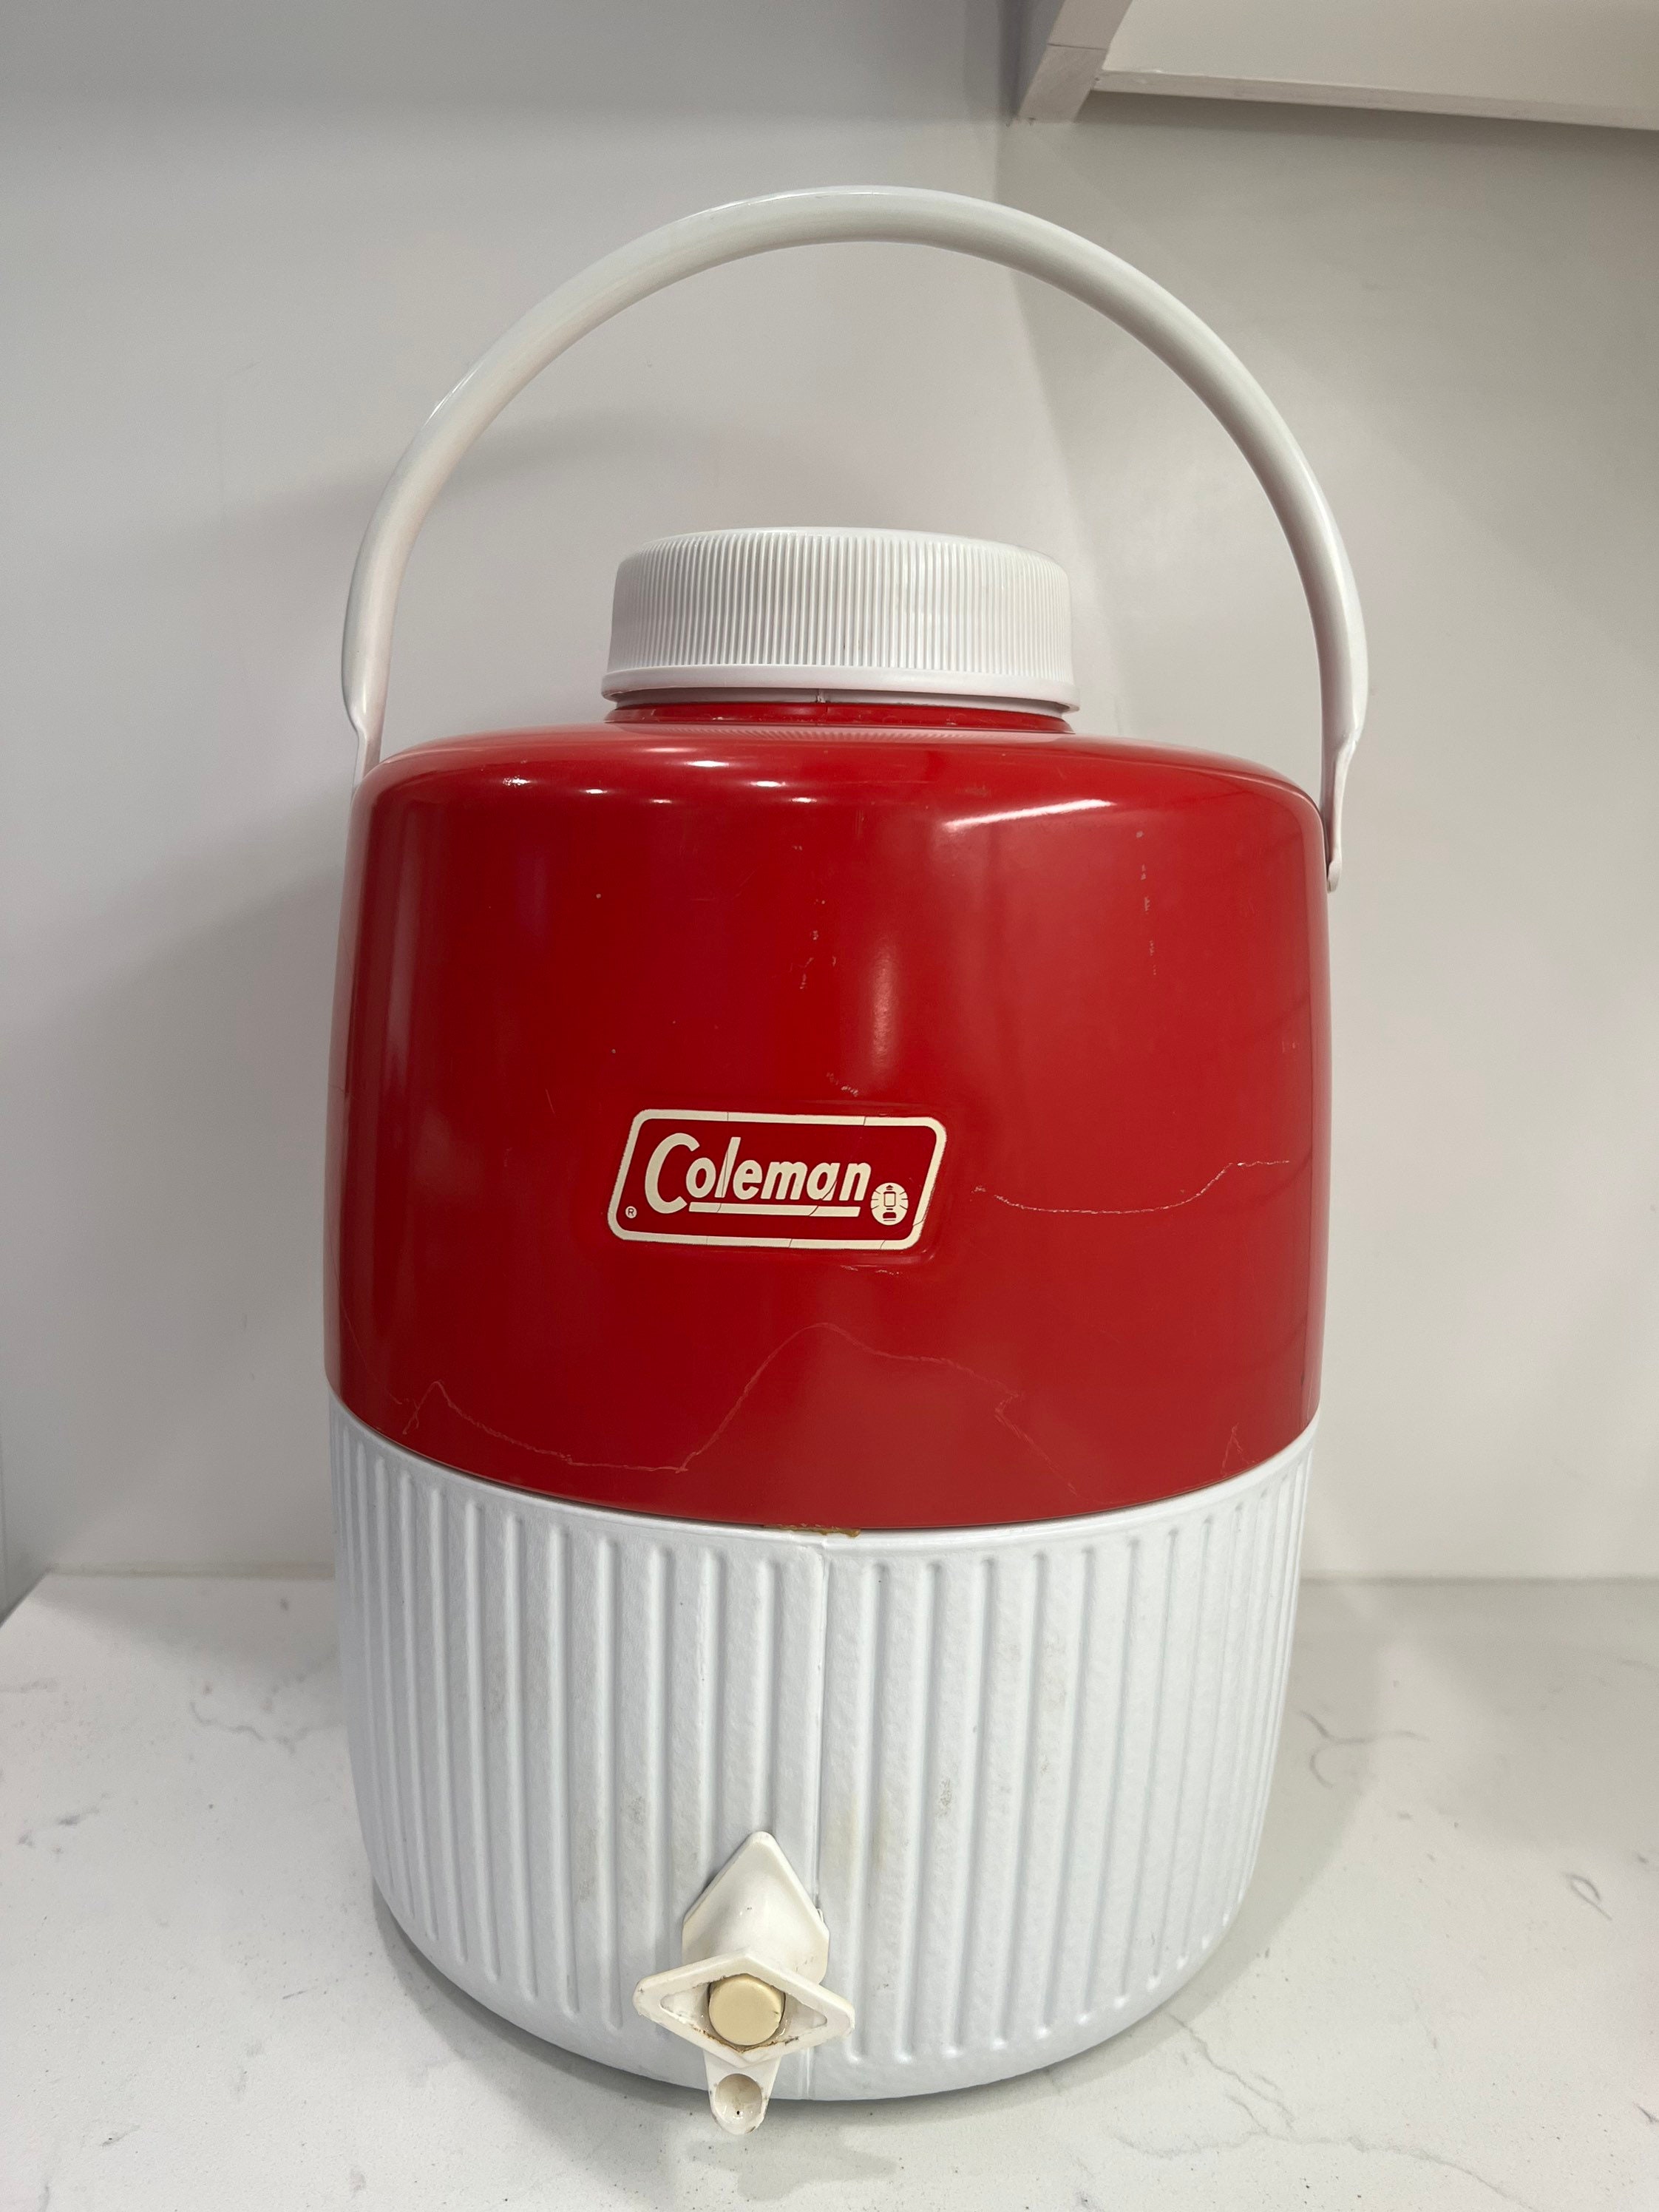 Vintage Coleman 2 Gallon Insulated Water Cooler With Spigot, Water Jug,  Sporting Event, Camping -  Sweden